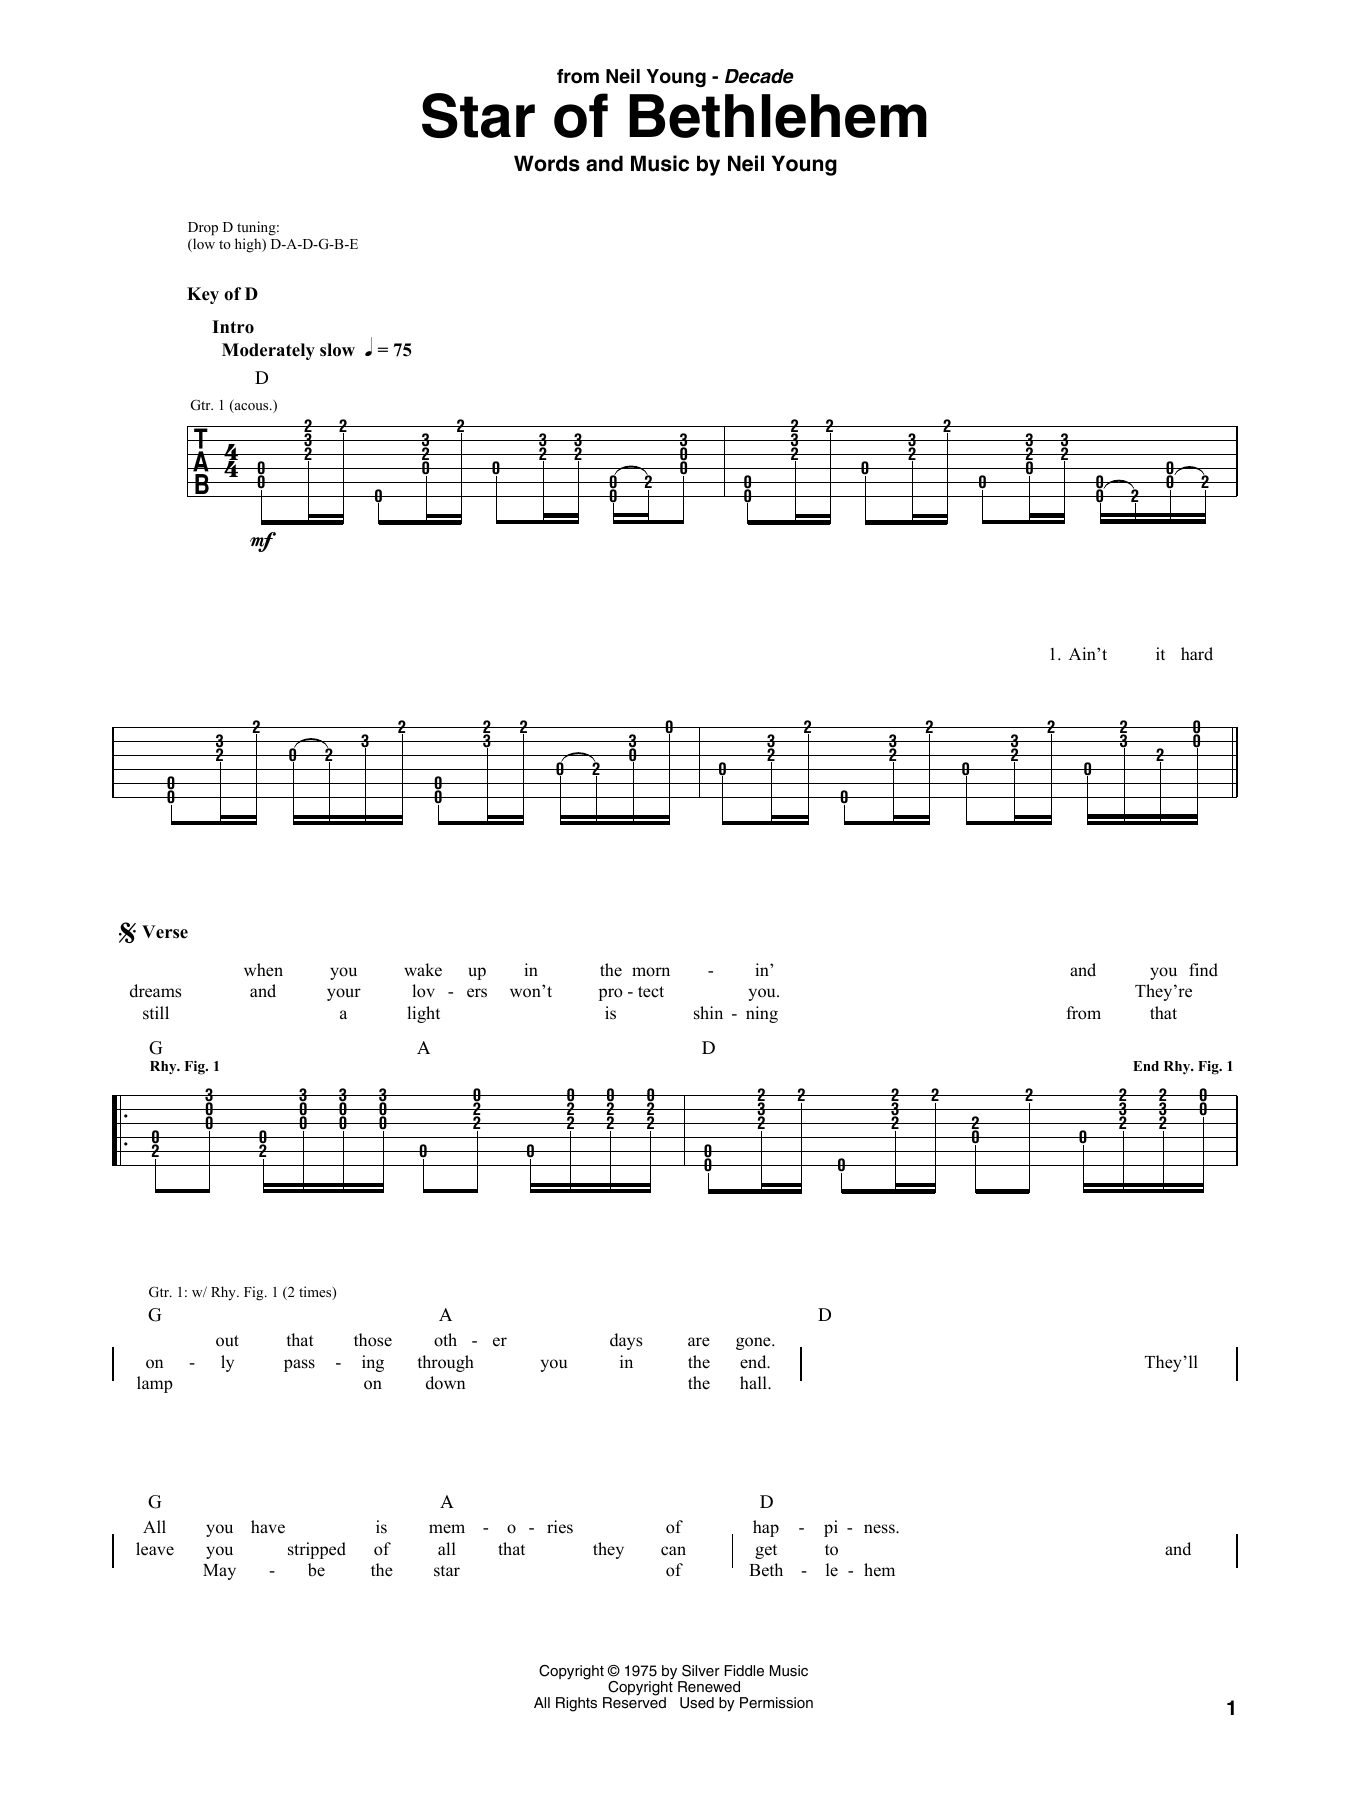 Download Neil Young Star Of Bethlehem Sheet Music